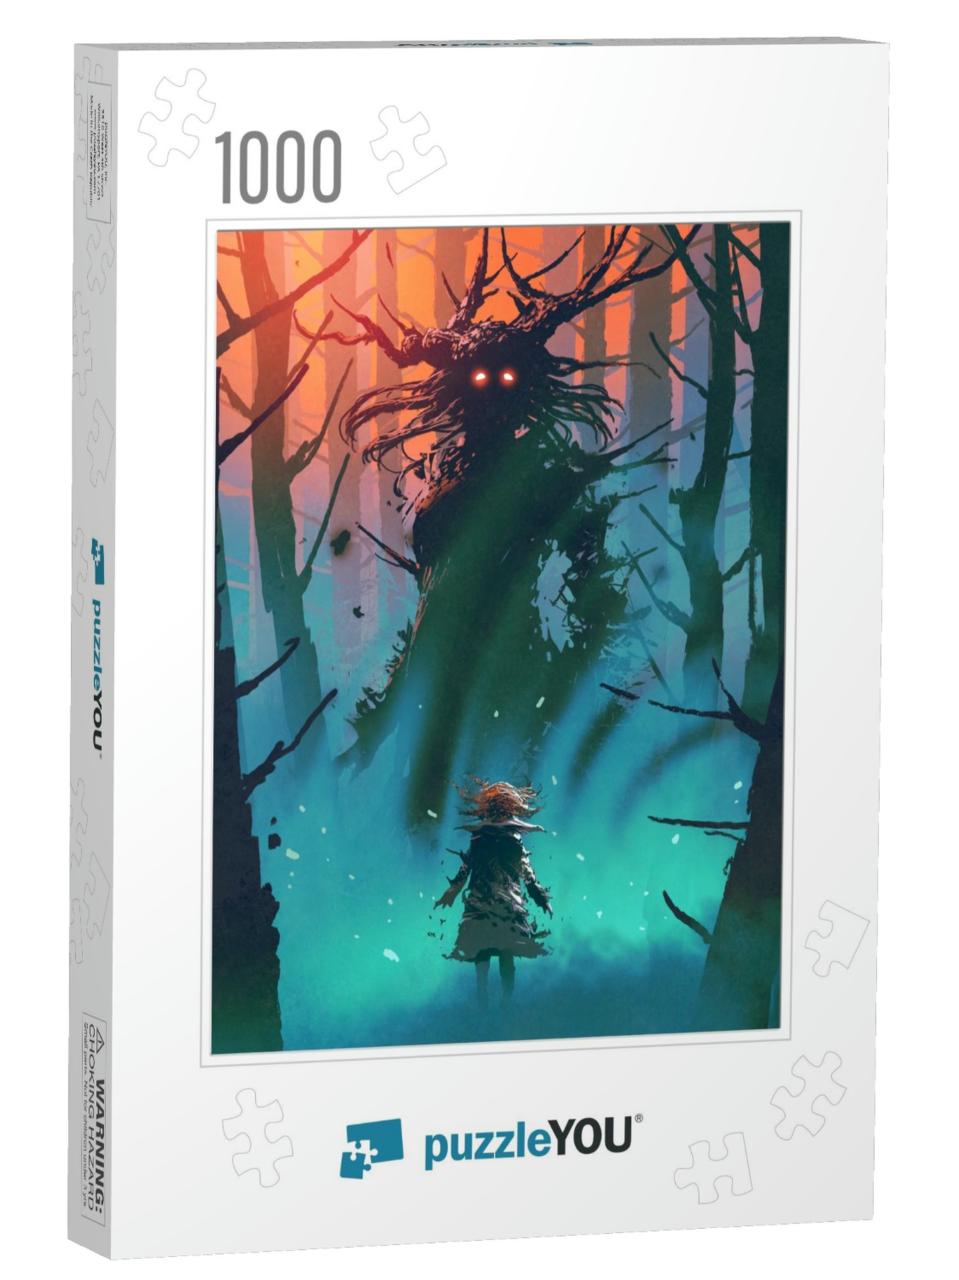 Little Girl & the Witch Looking Each Other in a Forest, D... Jigsaw Puzzle with 1000 pieces